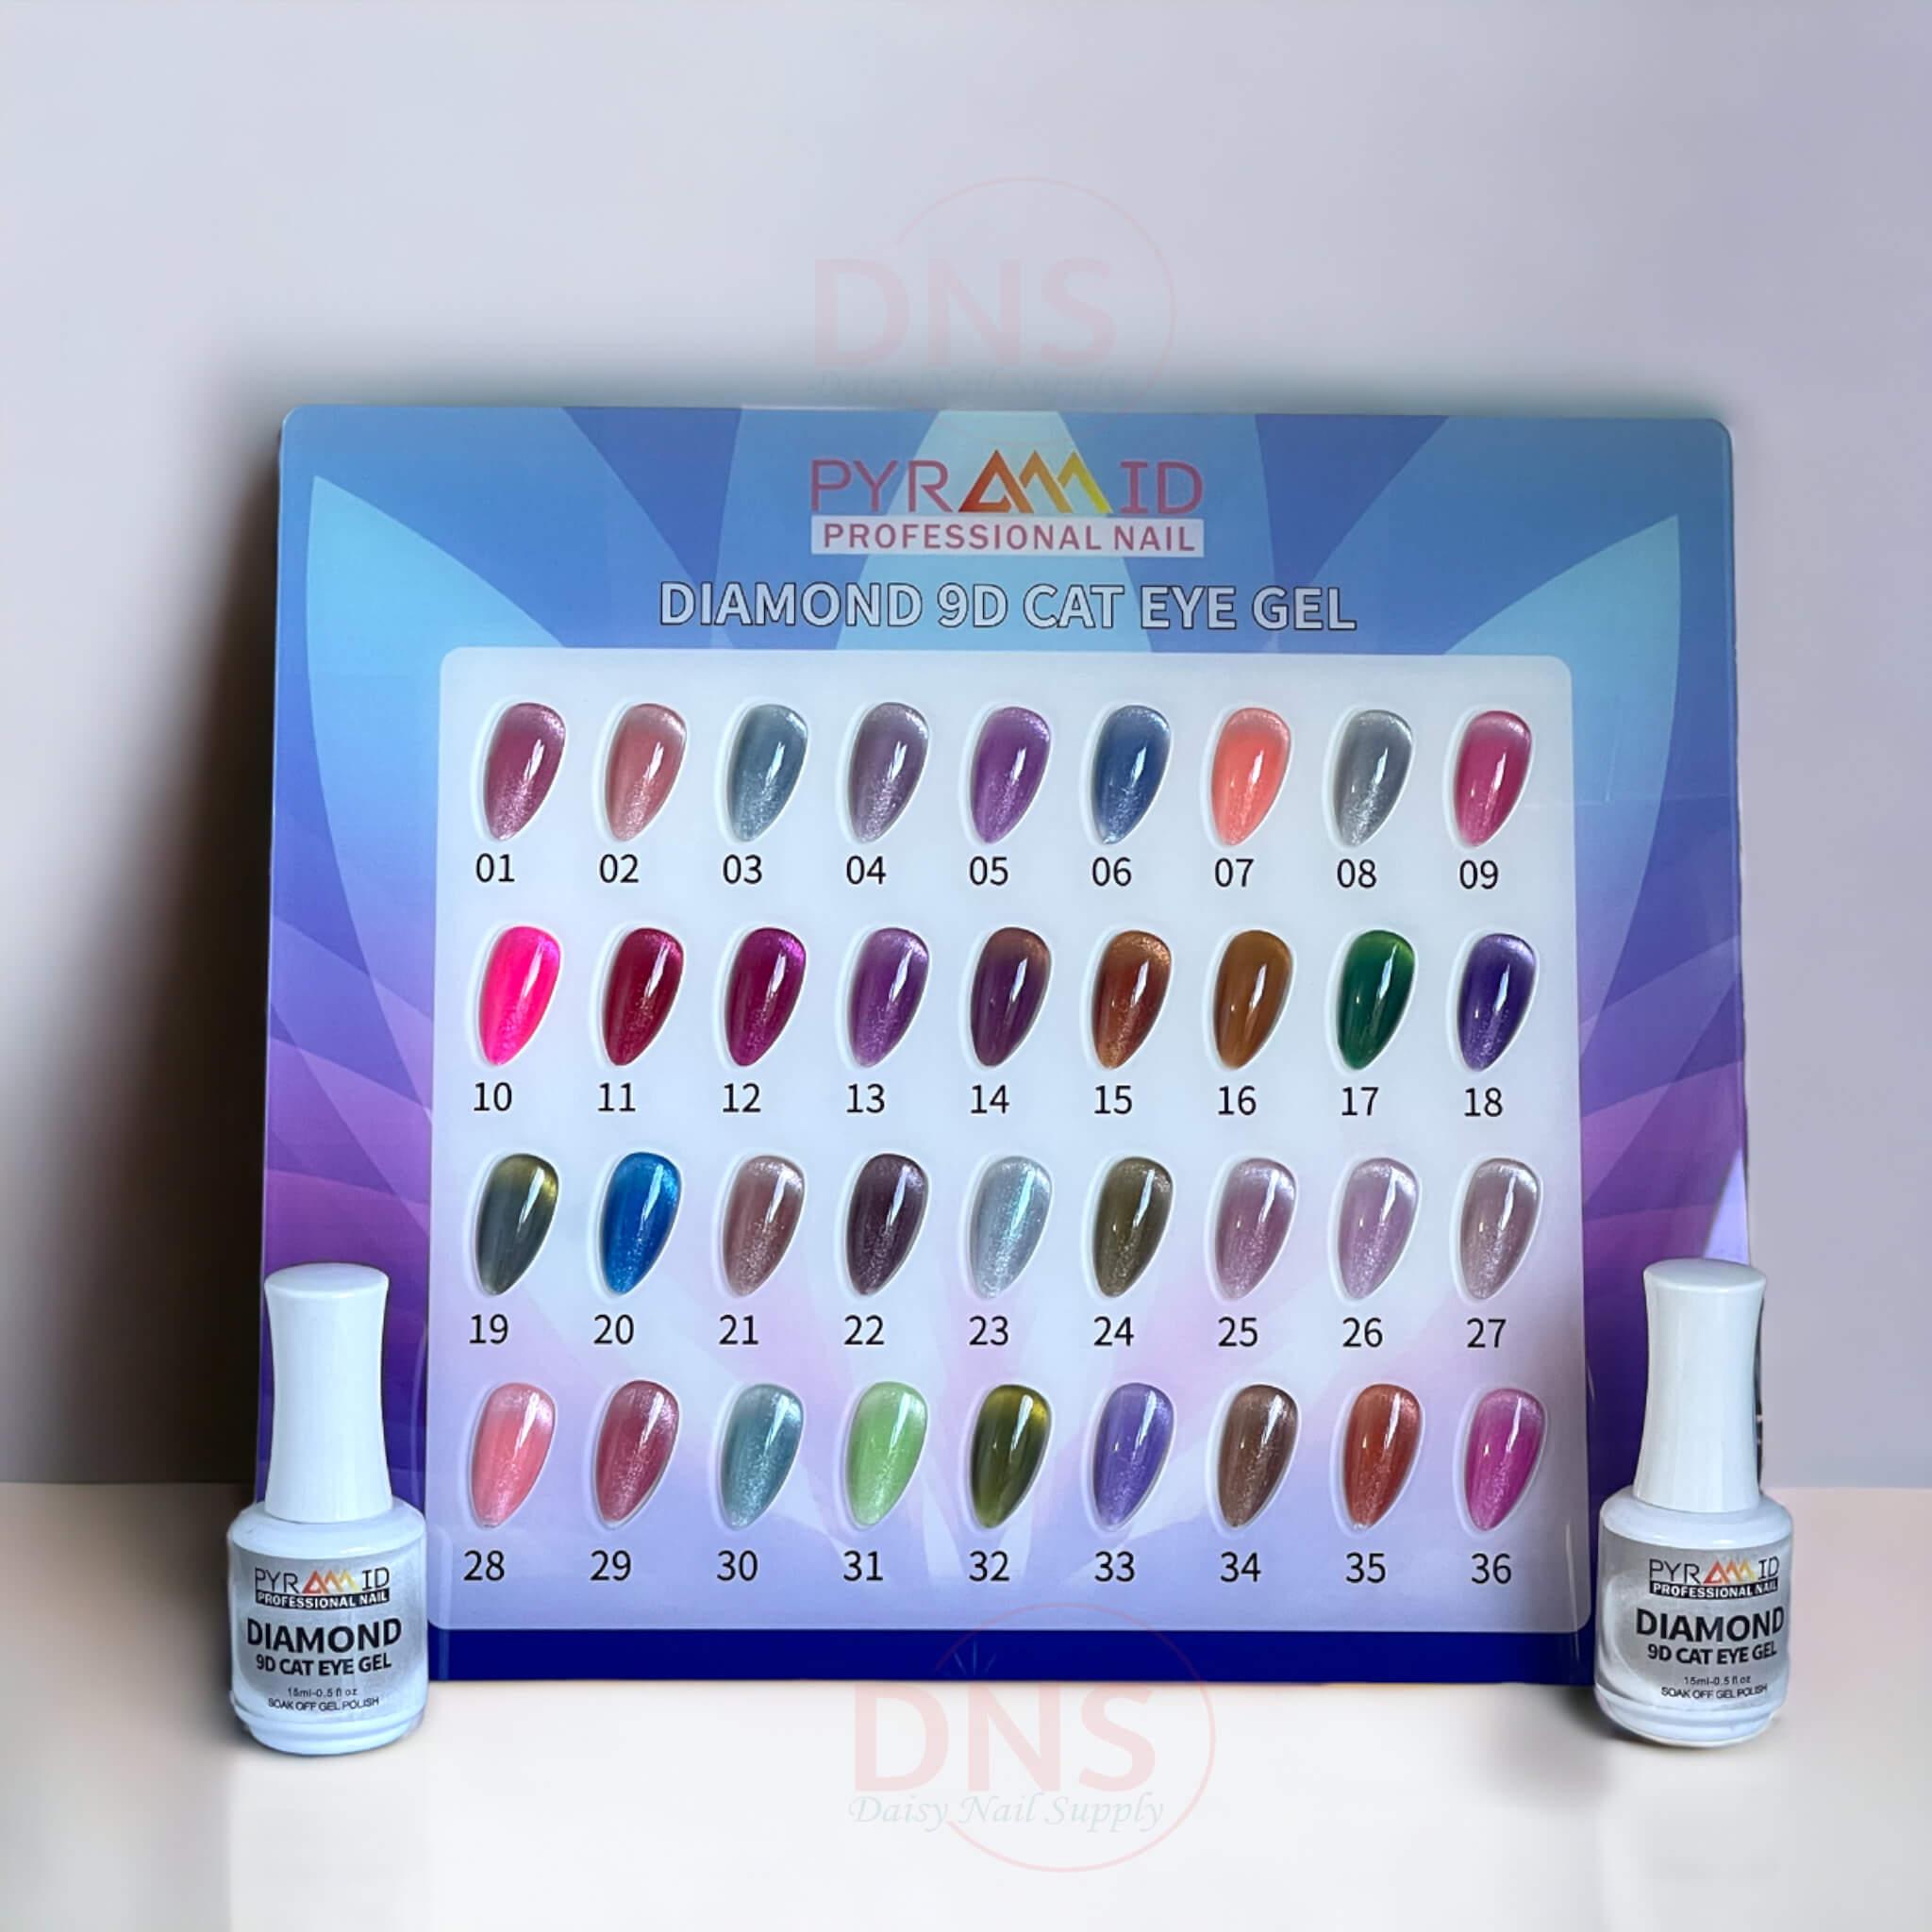 Pyramid Gel Cat Eye (Set of 36 Colors) #01 --> #36 + Free Color Chart and Magnet